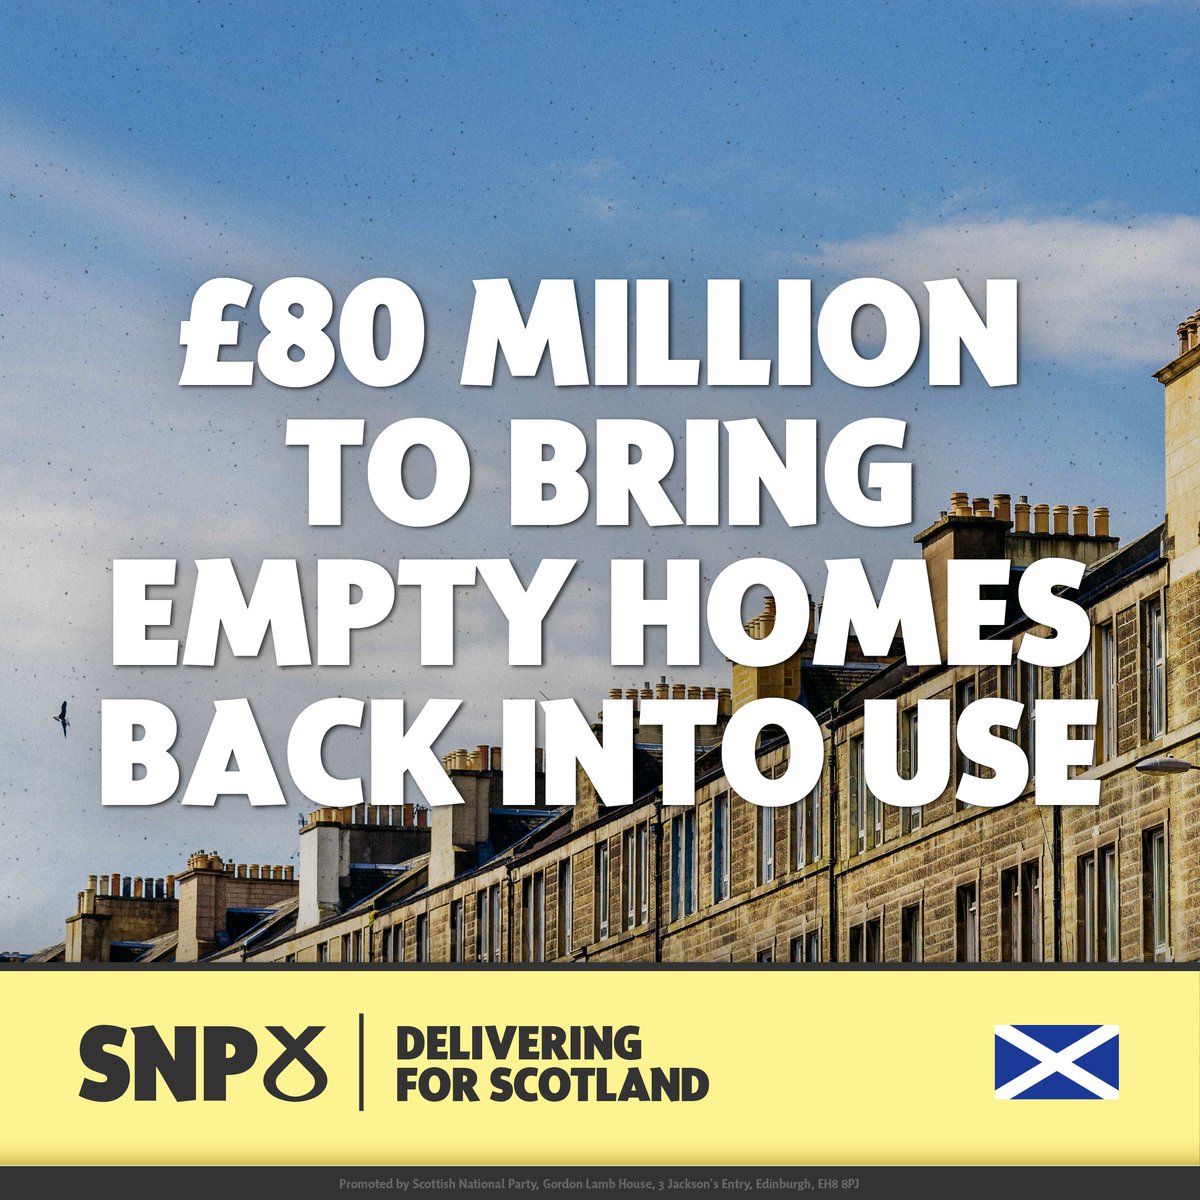 🏡 We’re investing an additional £80m in Scotland’s housing sector to bring empty properties back into use as affordable housing. 🏴󠁧󠁢󠁳󠁣󠁴󠁿 We've already delivered 1,000 affordable homes through this scheme which is helping to tackle child poverty and reduce inequality.